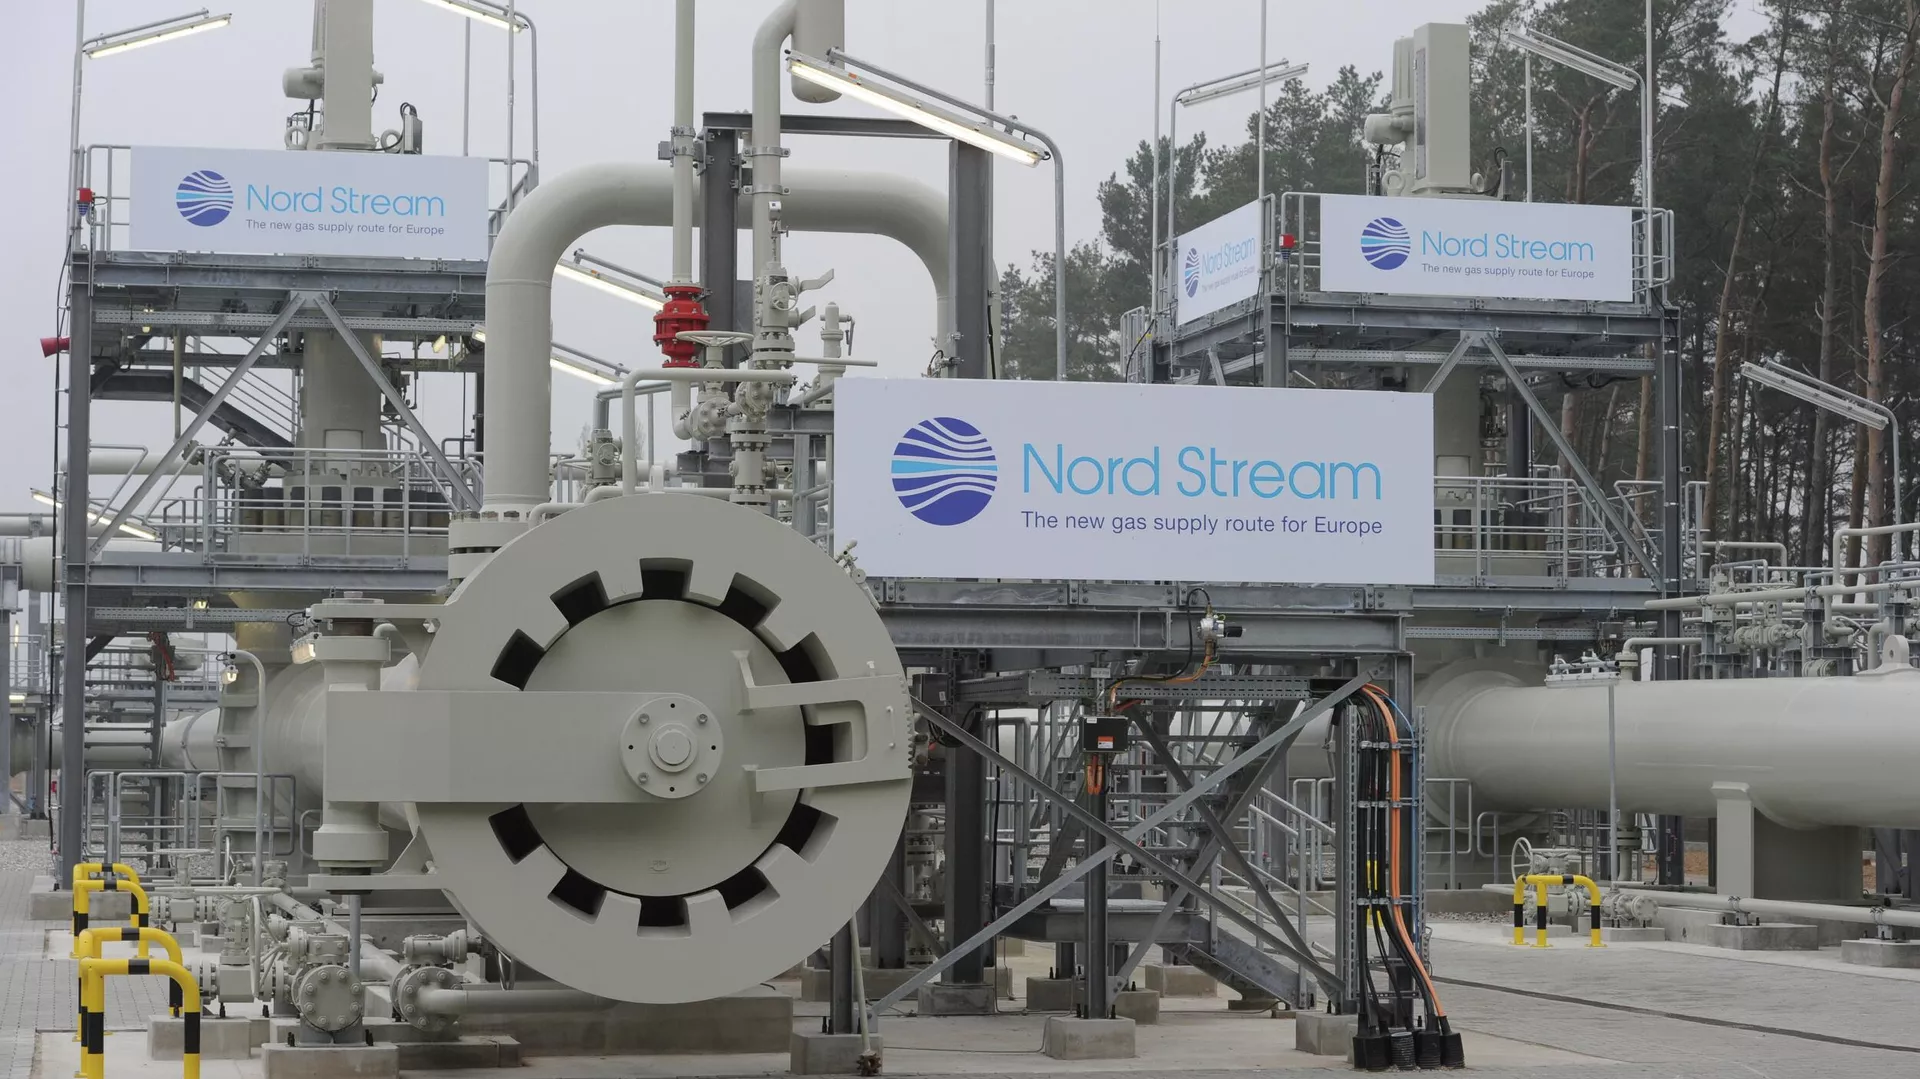 US Only Nation That Could Have Bombed Nord Stream, Ex-Senator Says